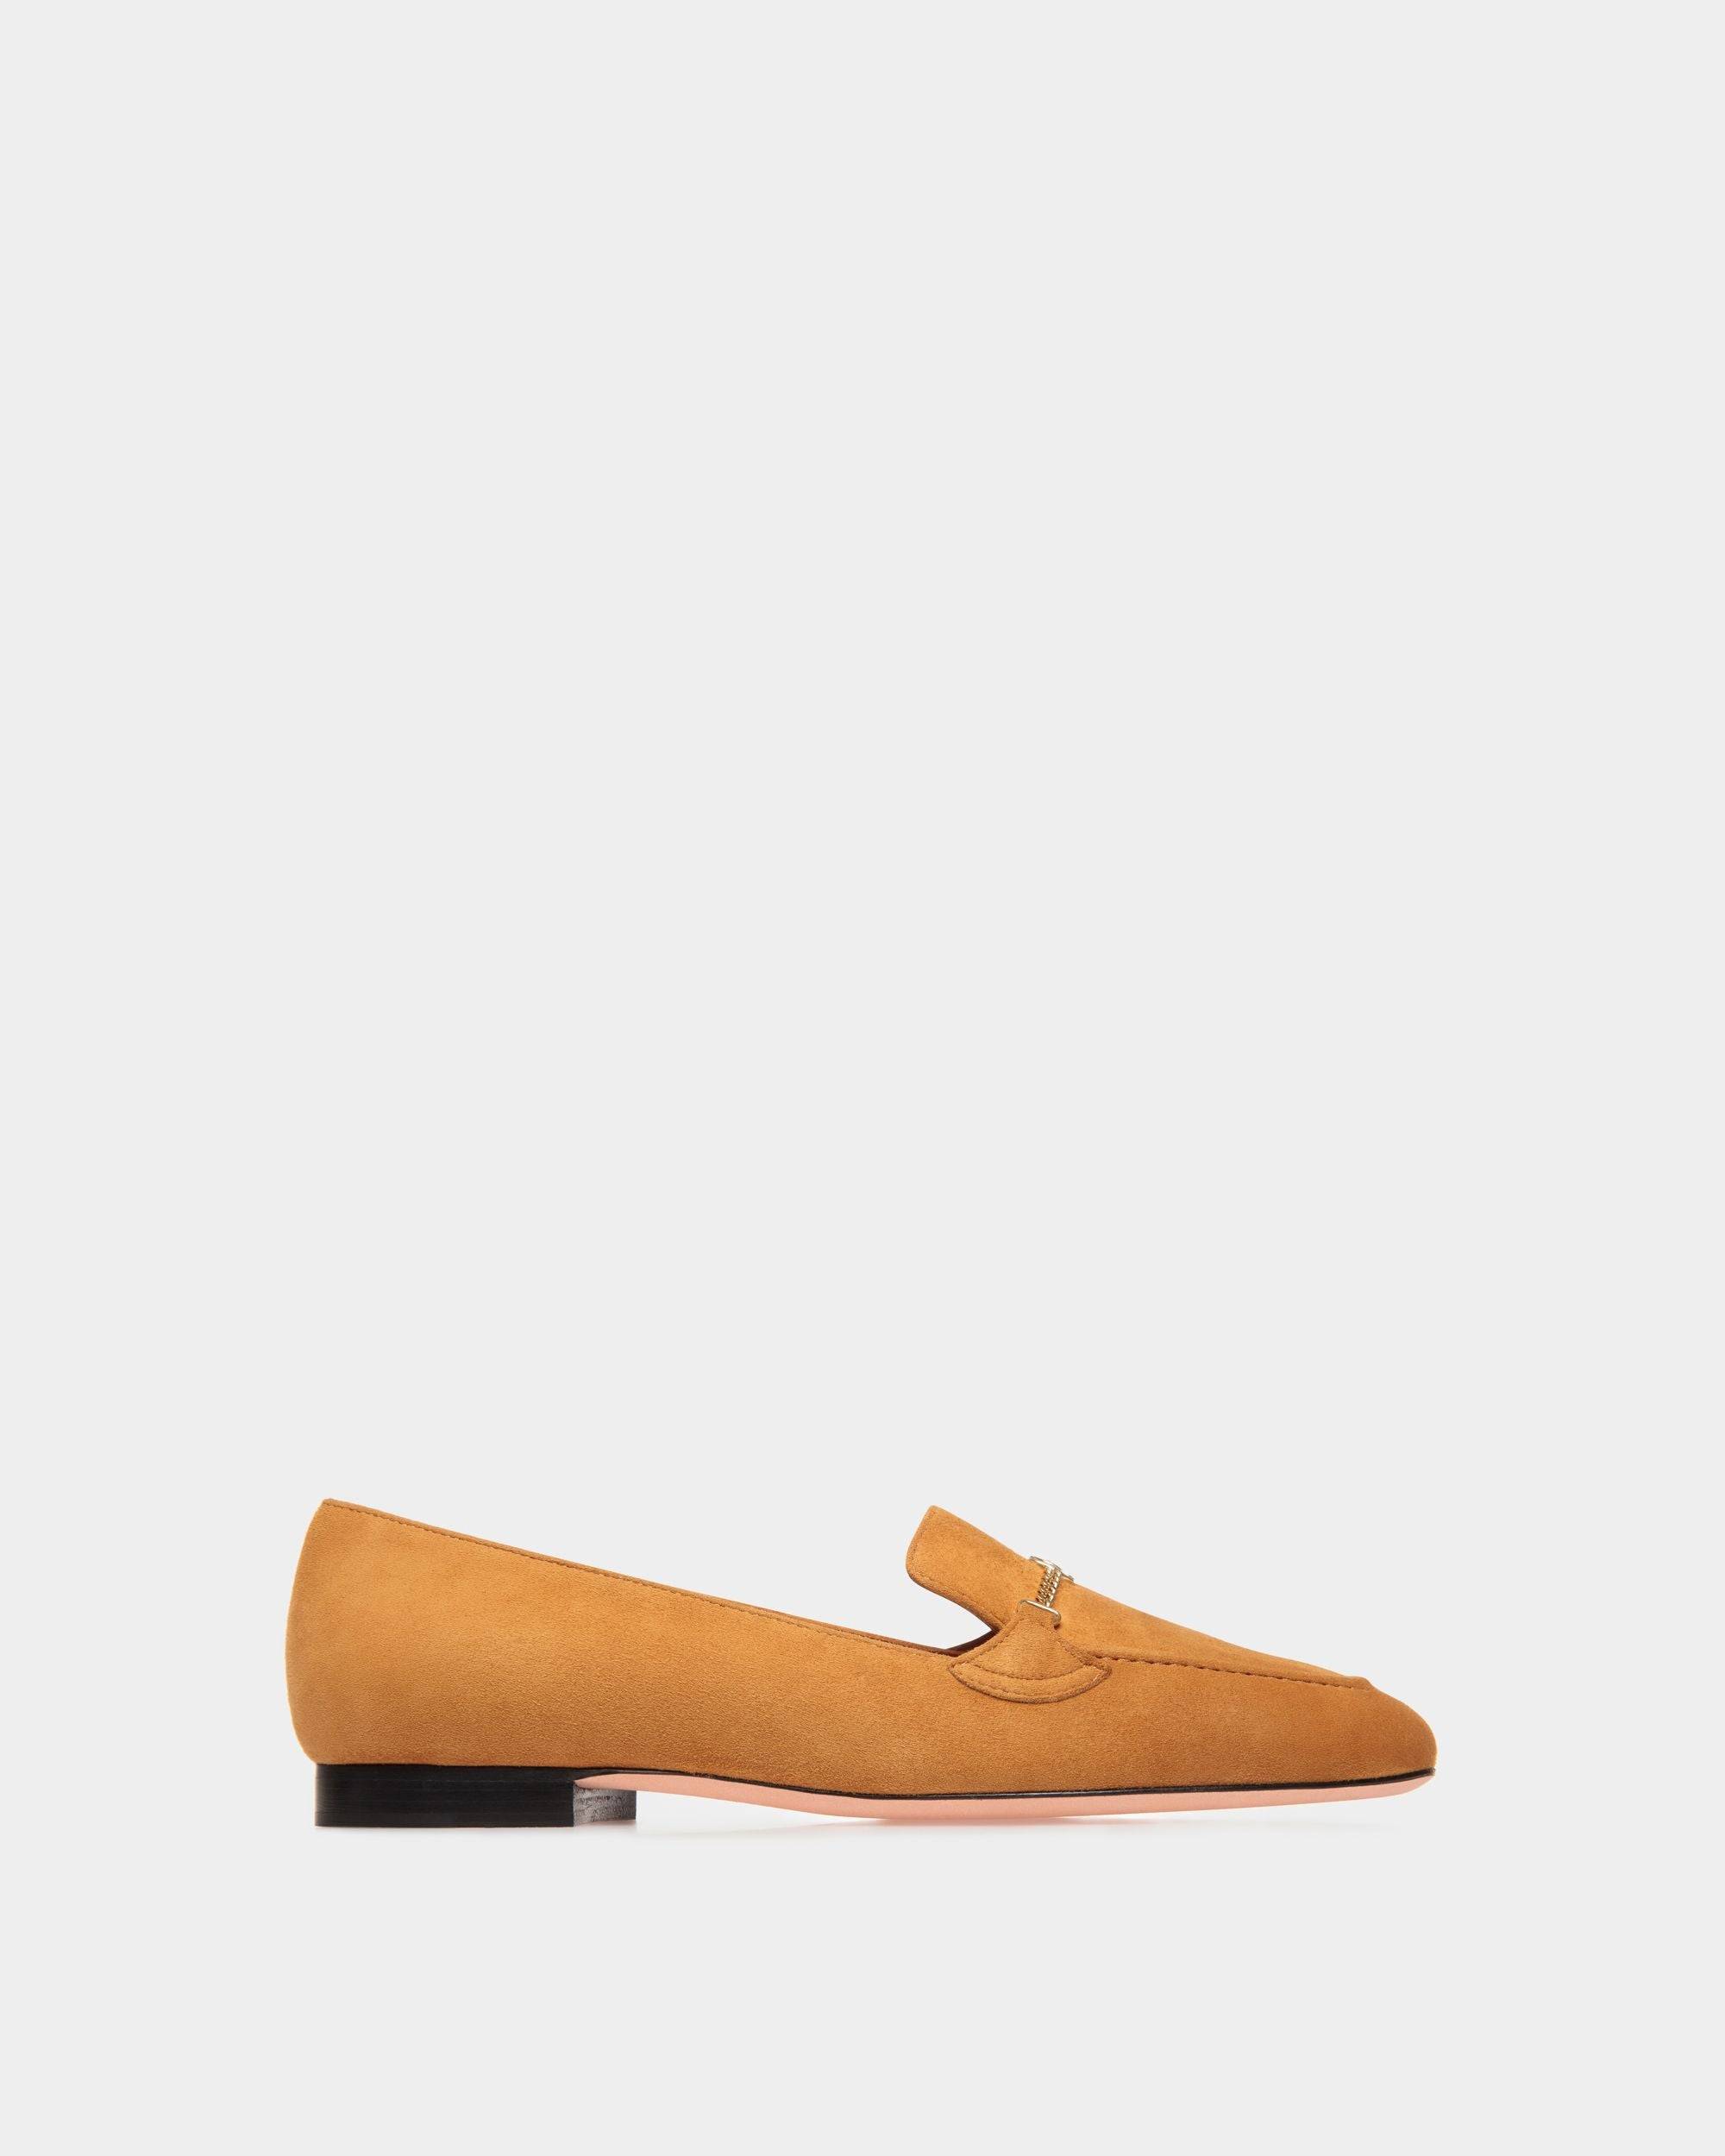 Daily Emblem | Women's Loafer in Brown Suede | Bally | Still Life Side